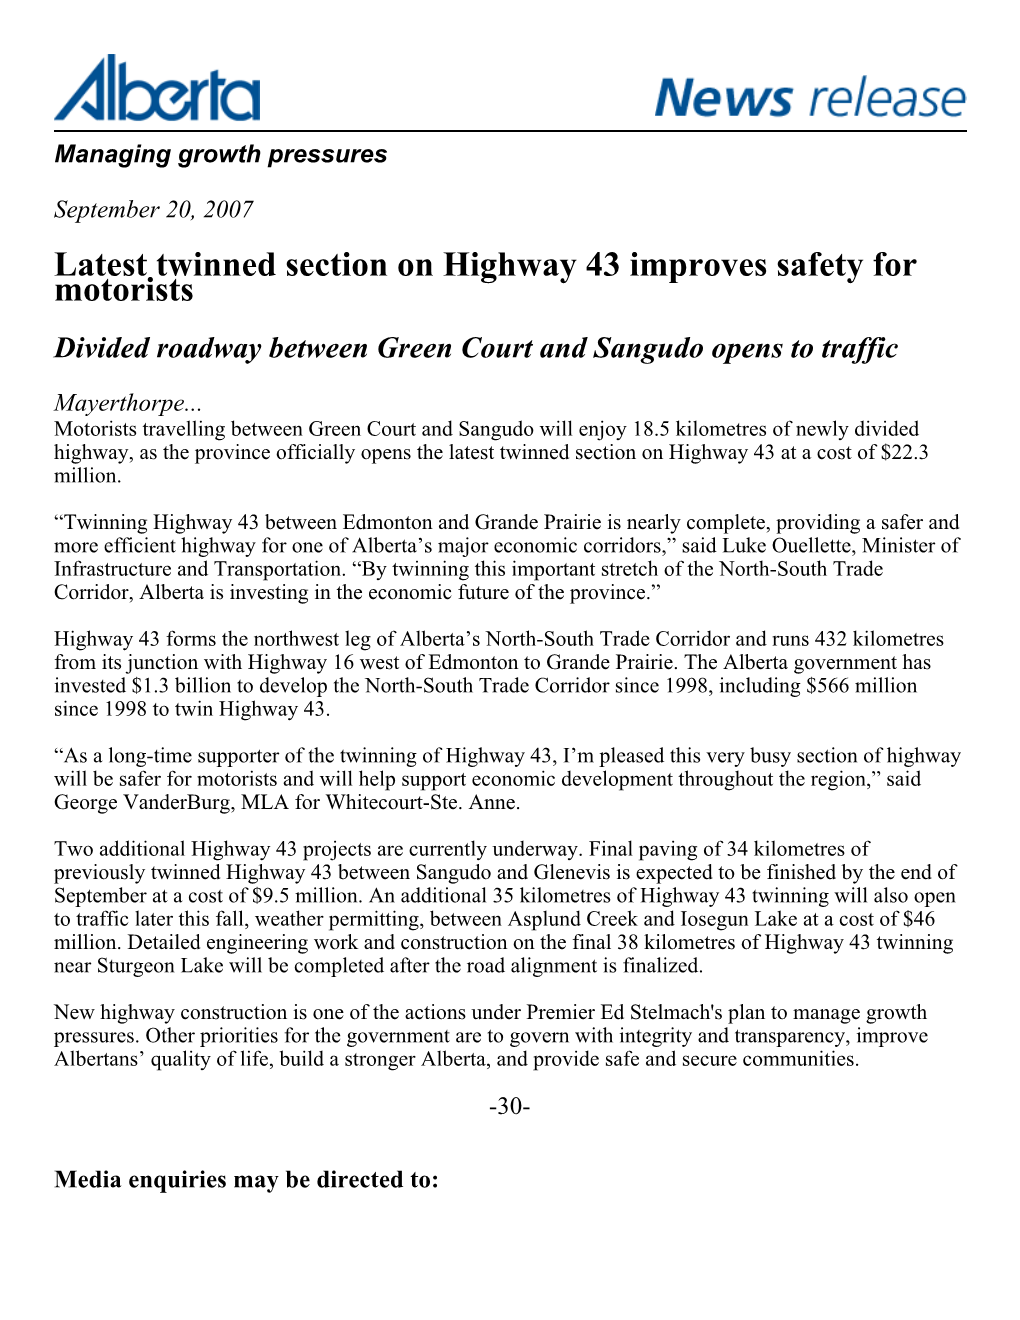 Latest Twinned Section on Highway 43 Improves Safety for Motorists Divided Roadway Between Green Court and Sangudo Opens to Traffic